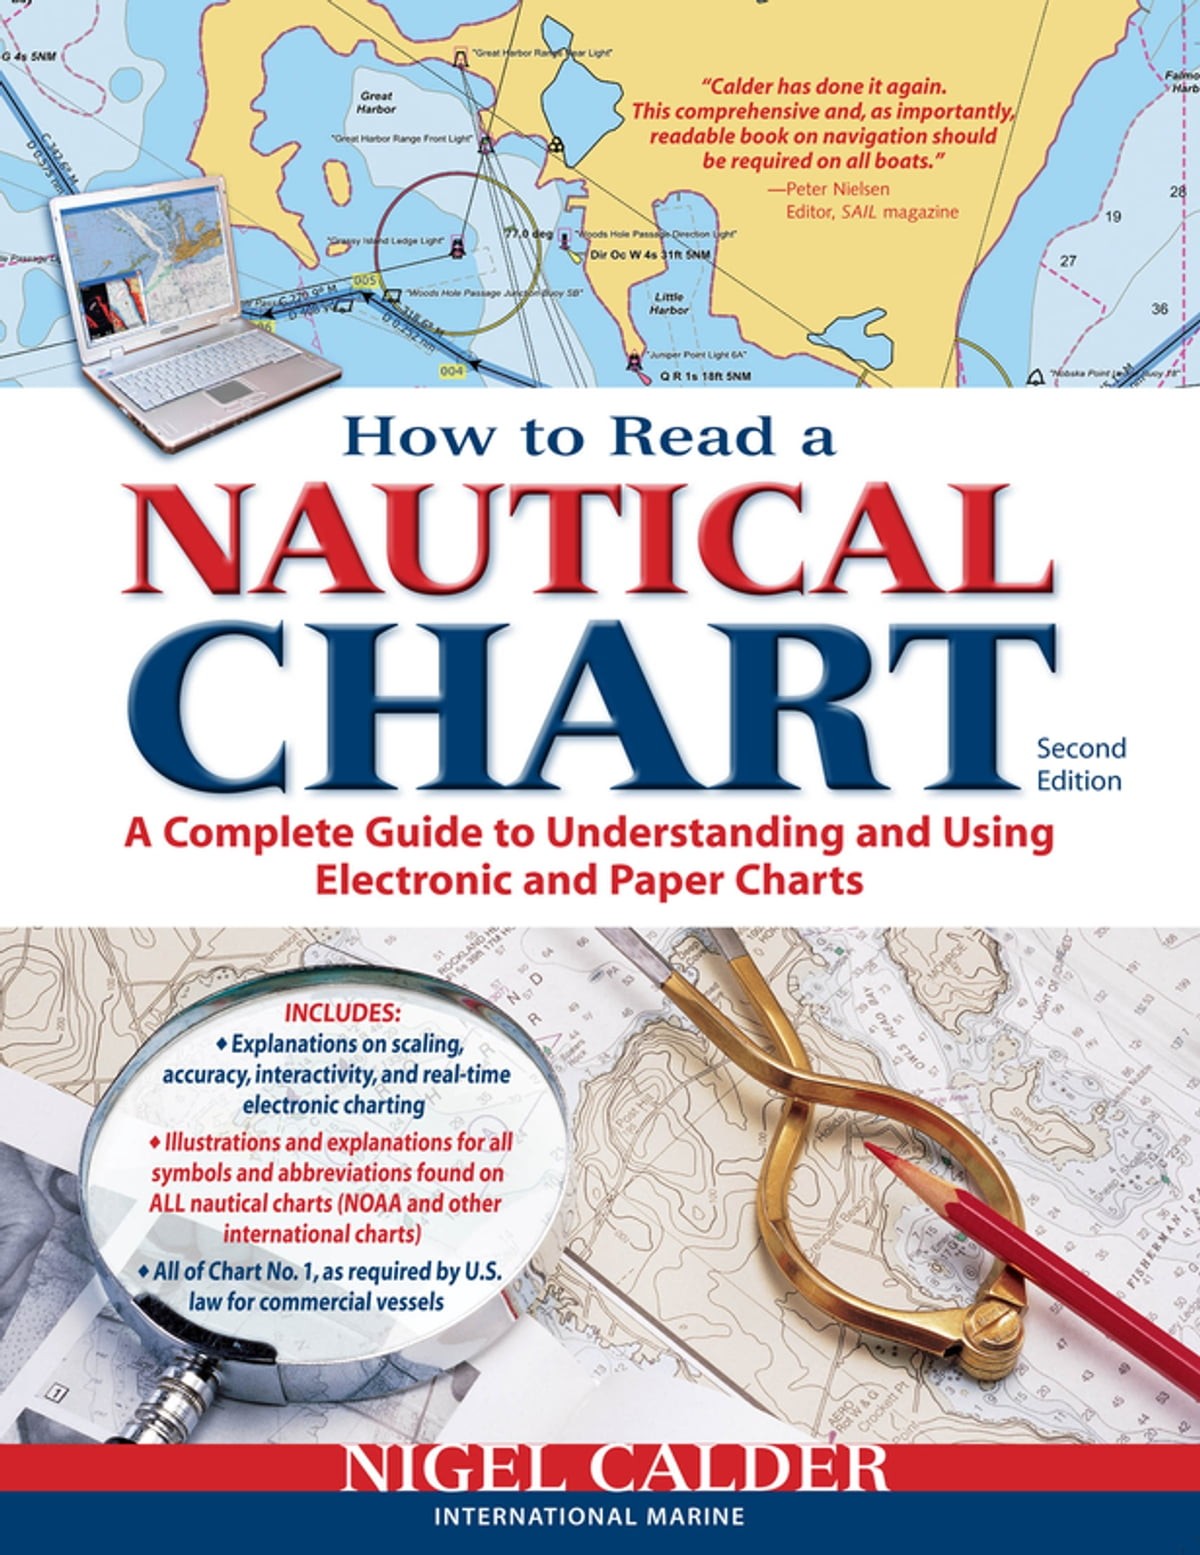 How to Read a Nautical Chart: A Captain's Quick Guide